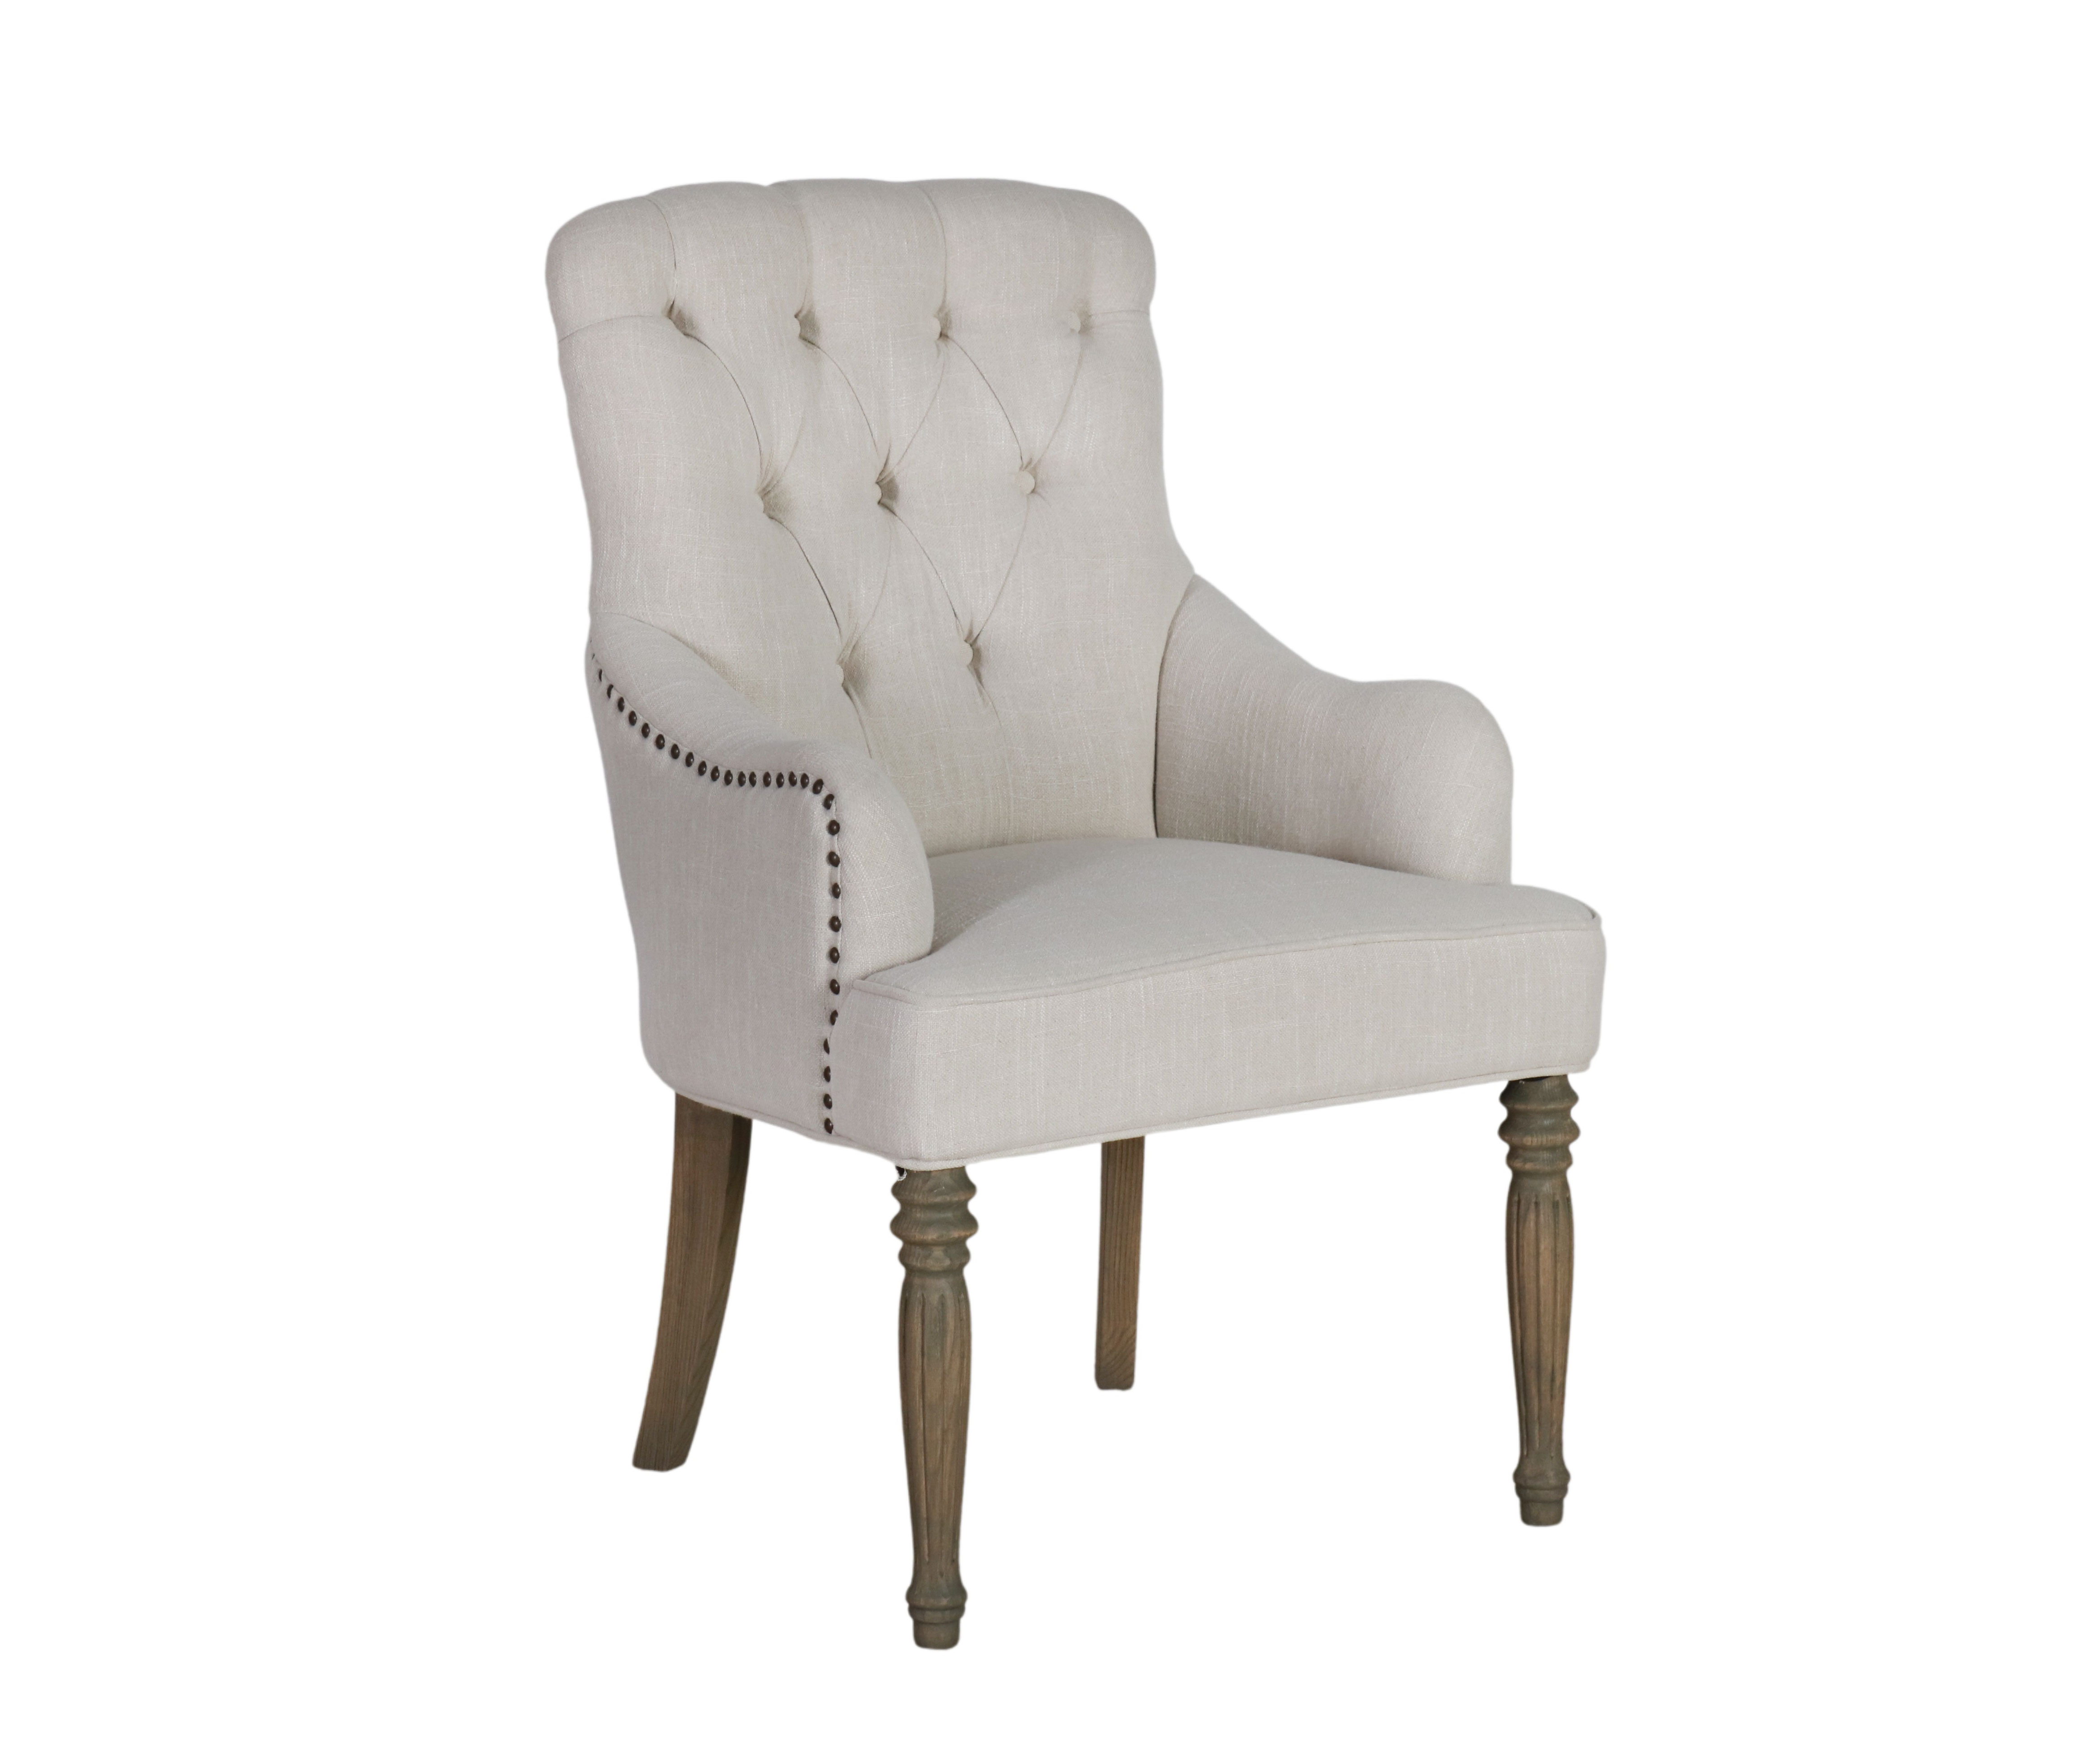 Cream upholstered carver chair with buttoned detail oak legs Château collection